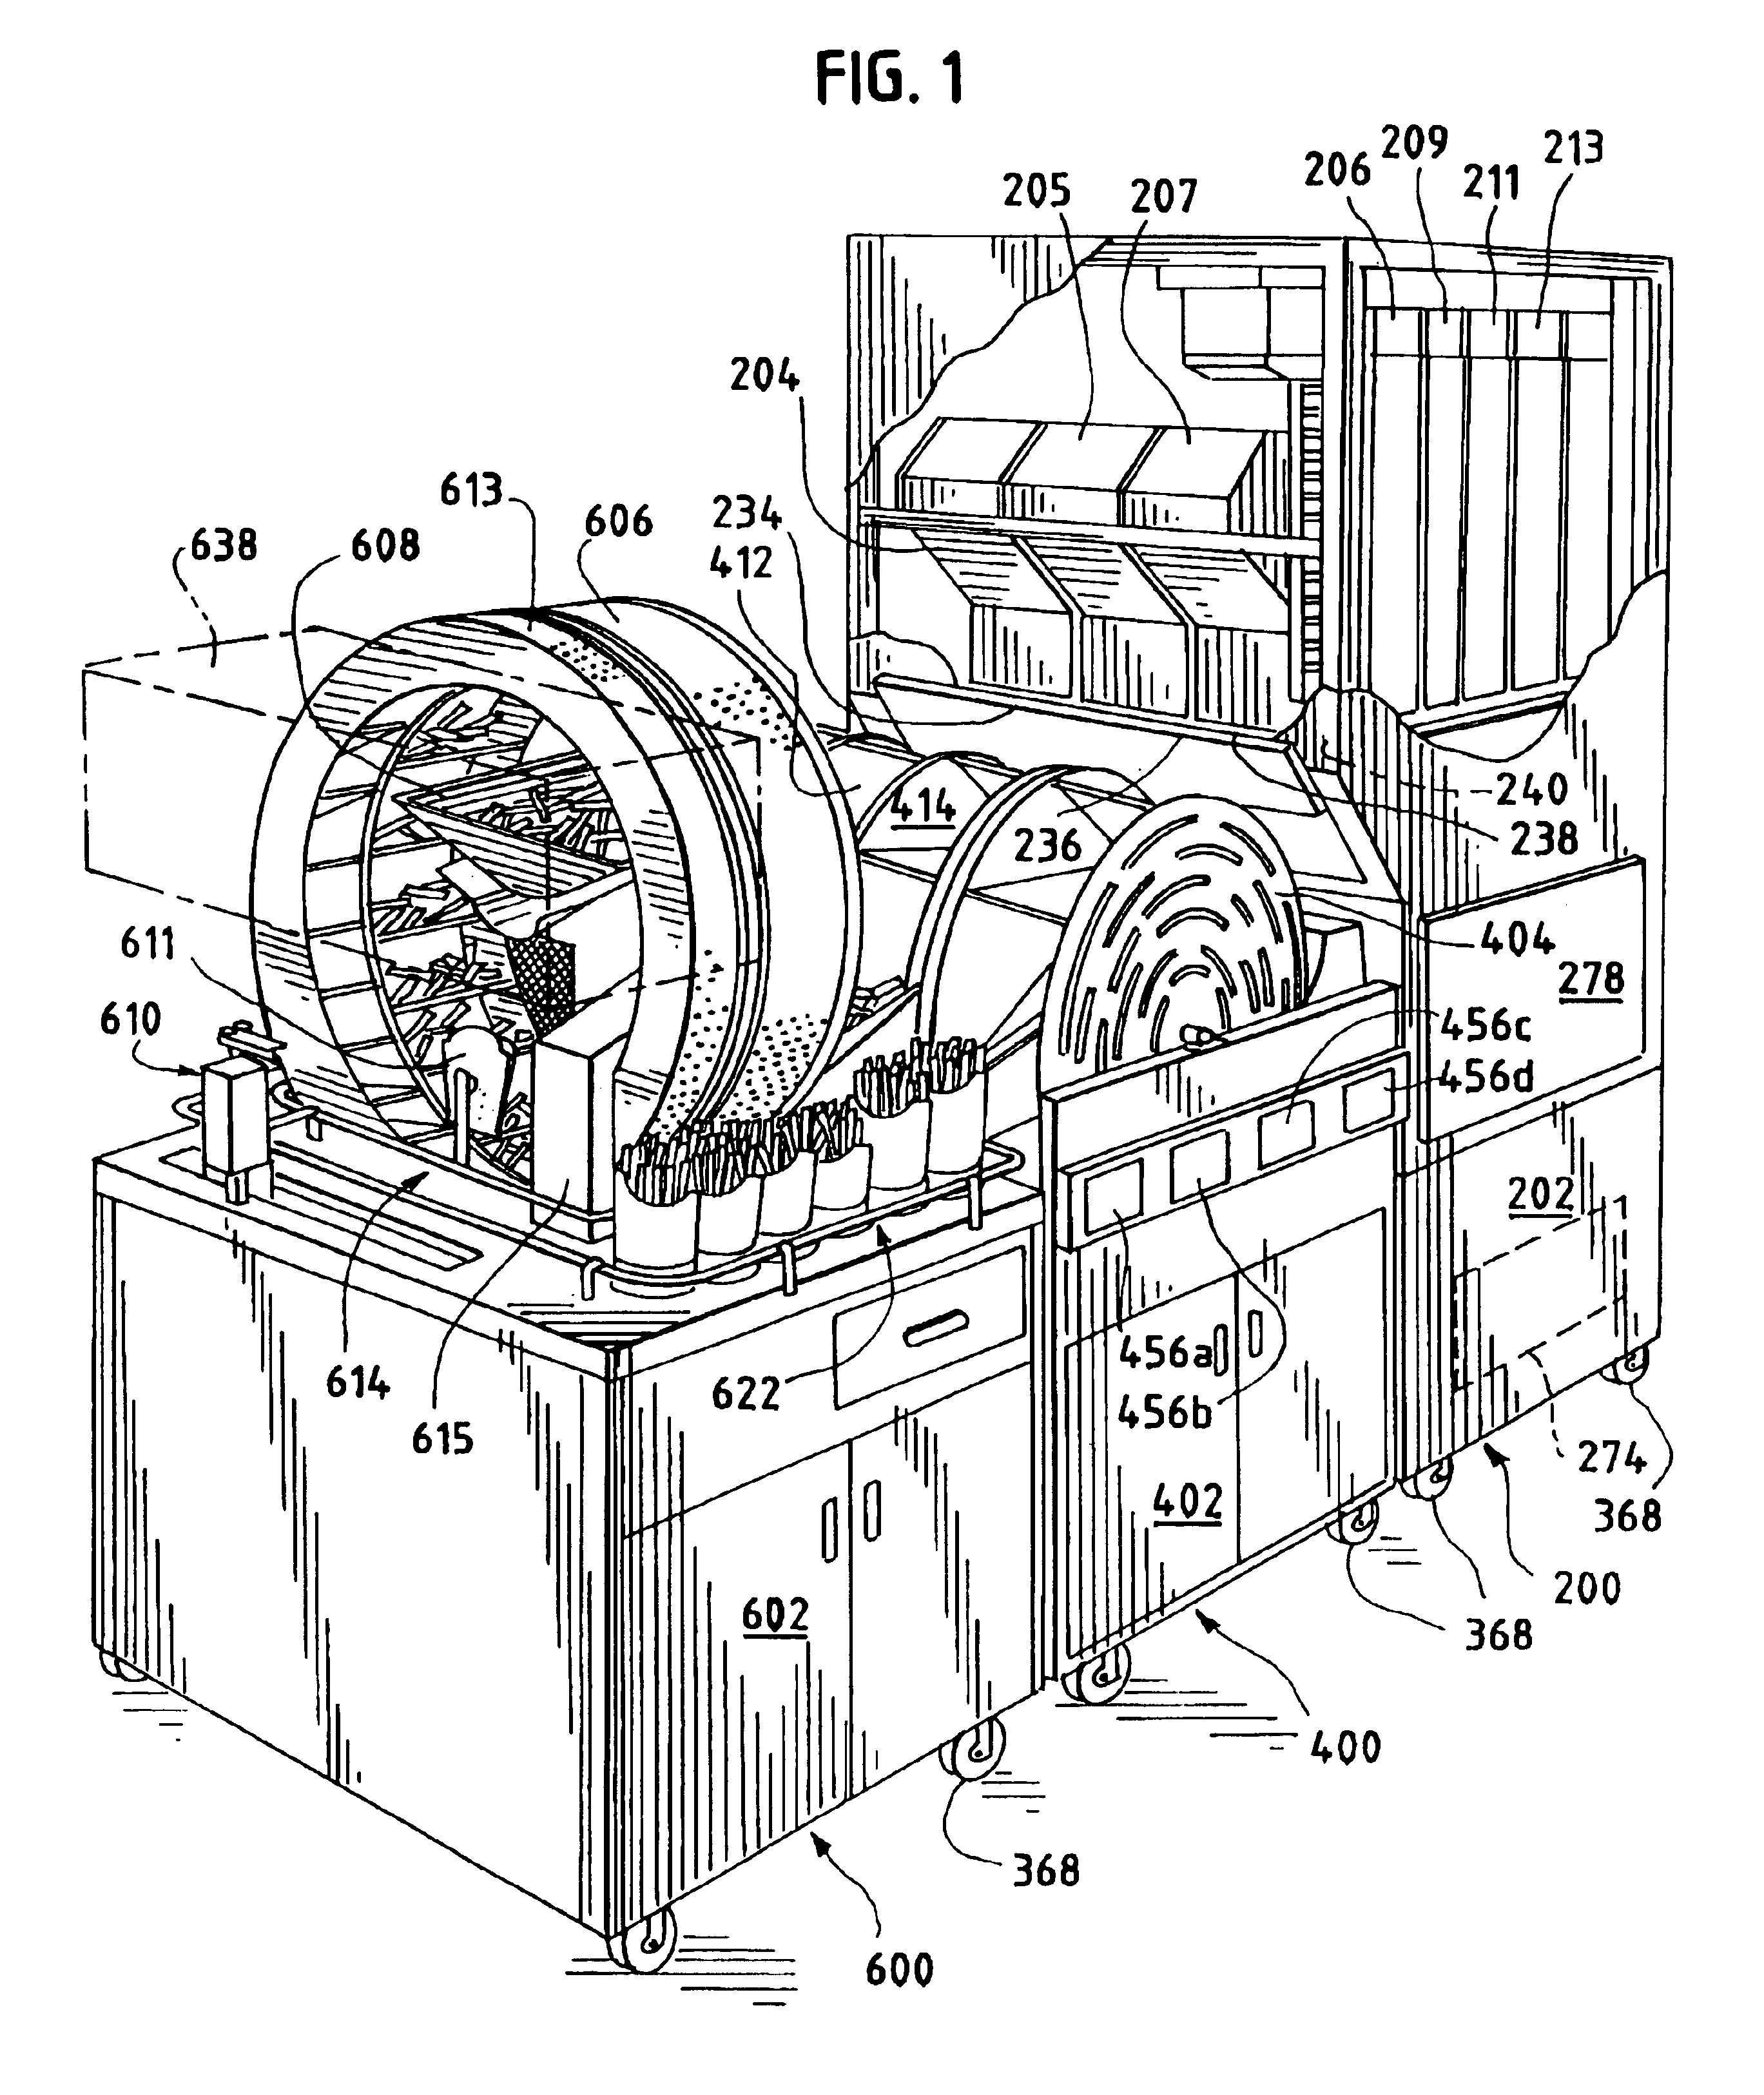 Automated system and method for handling food containers